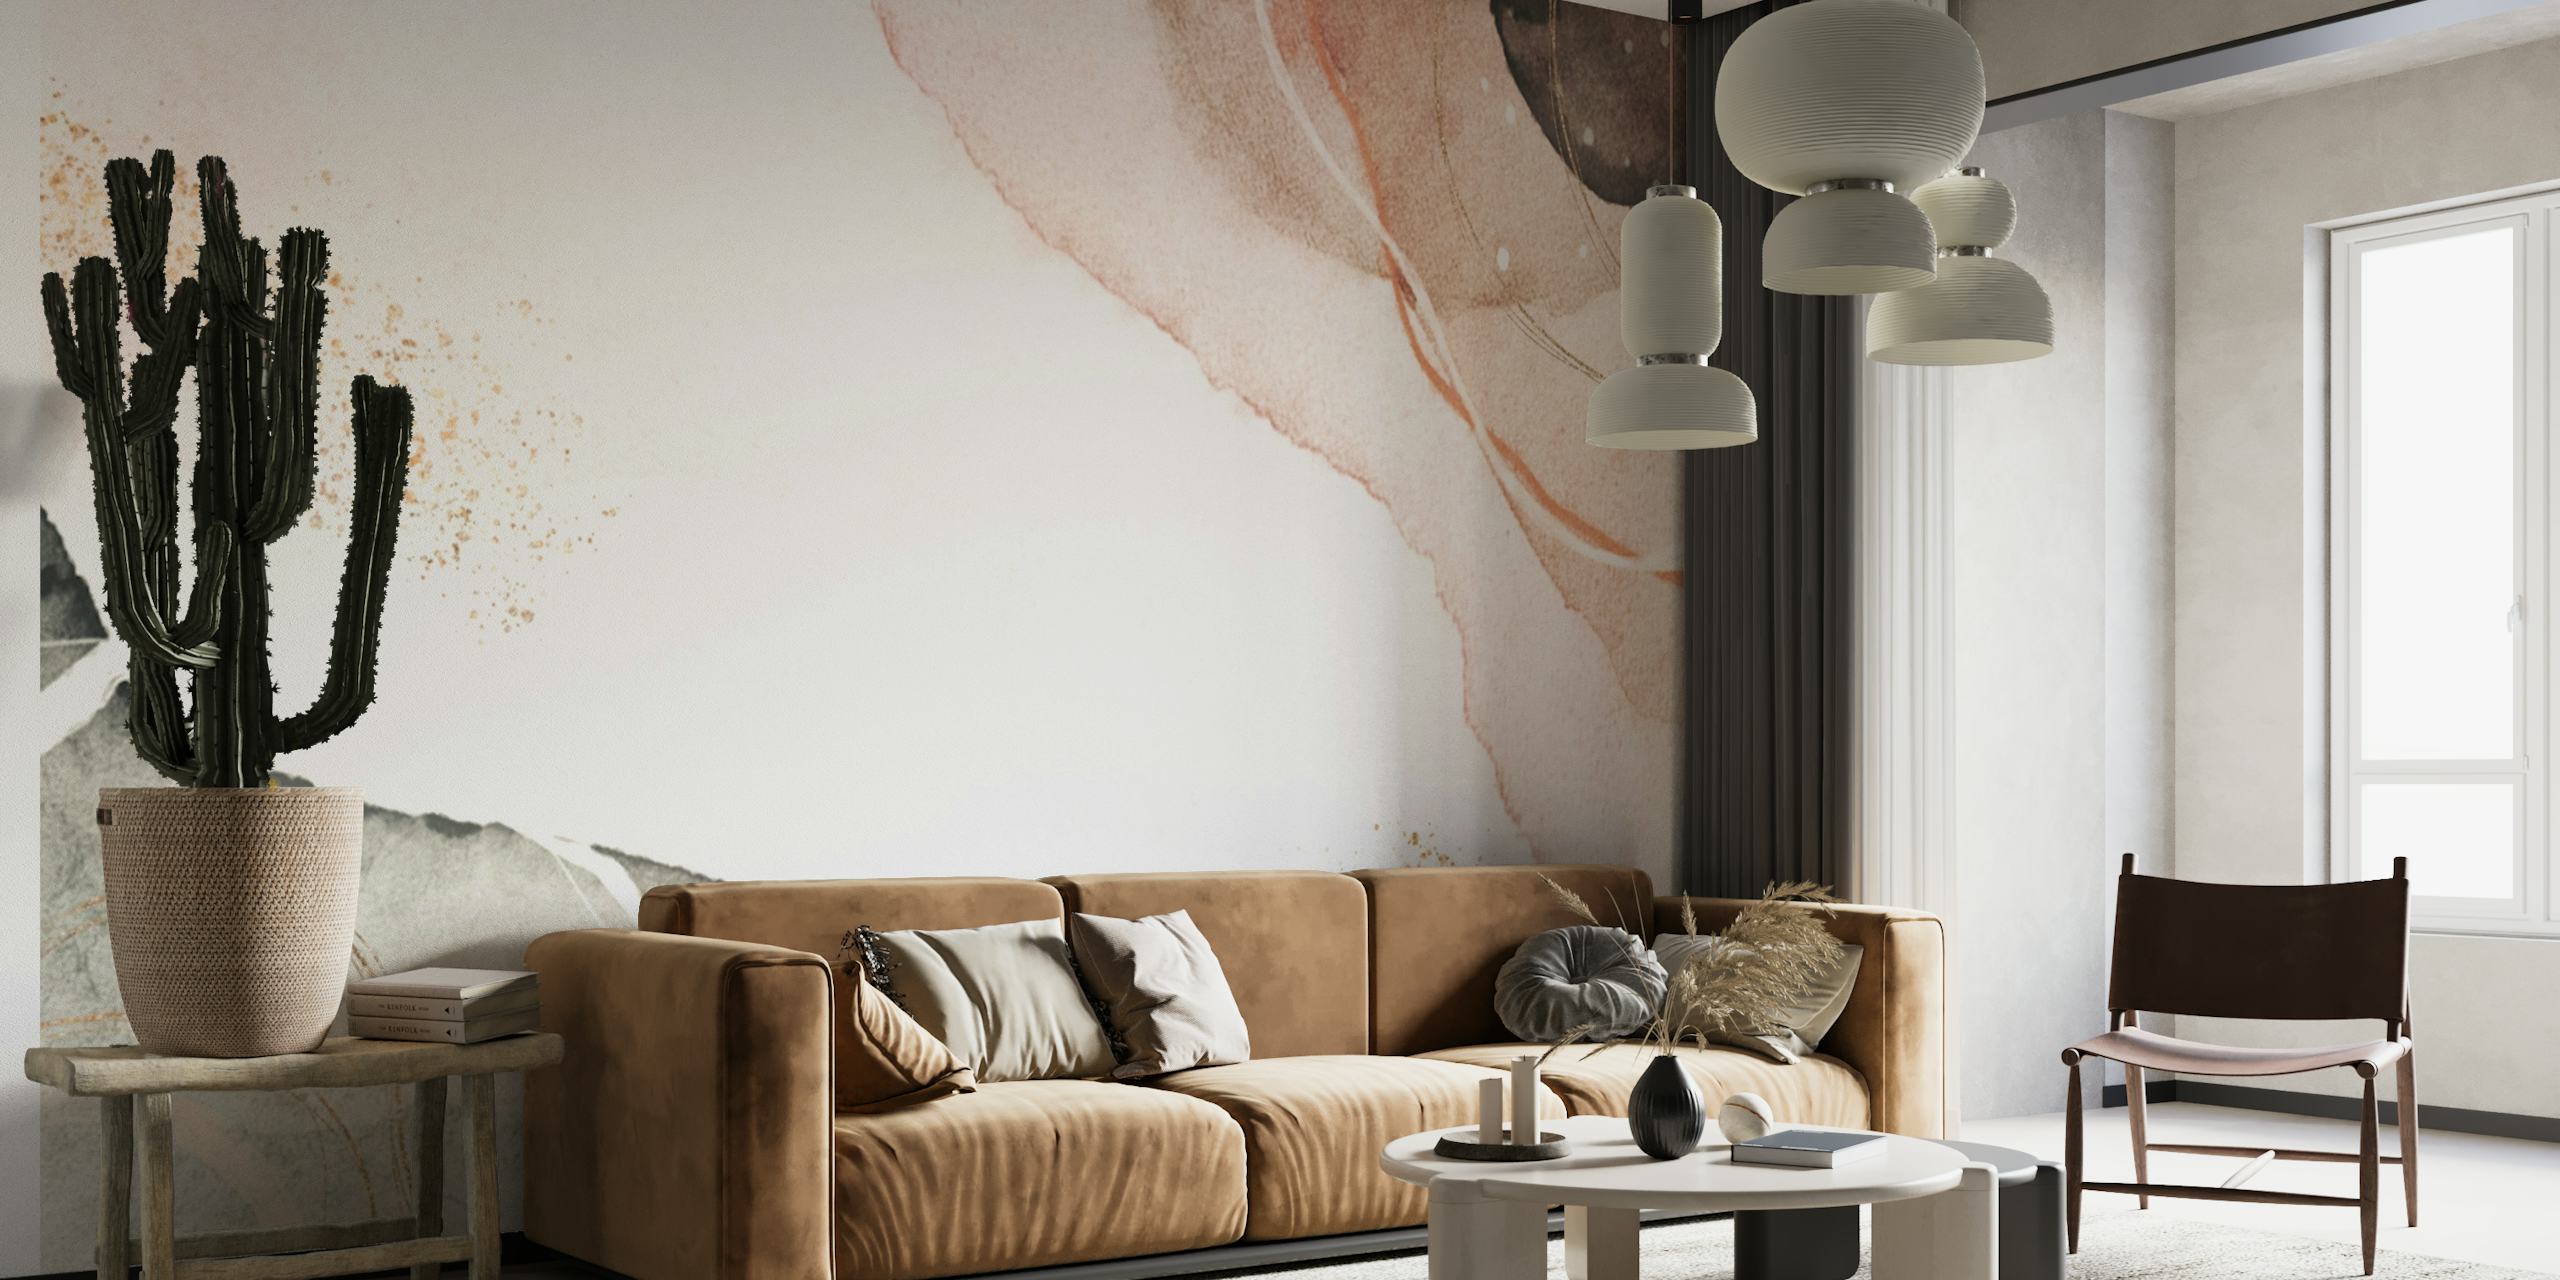 Artistic abstract wall mural in light beige with soft pastel textures and sparkling accents